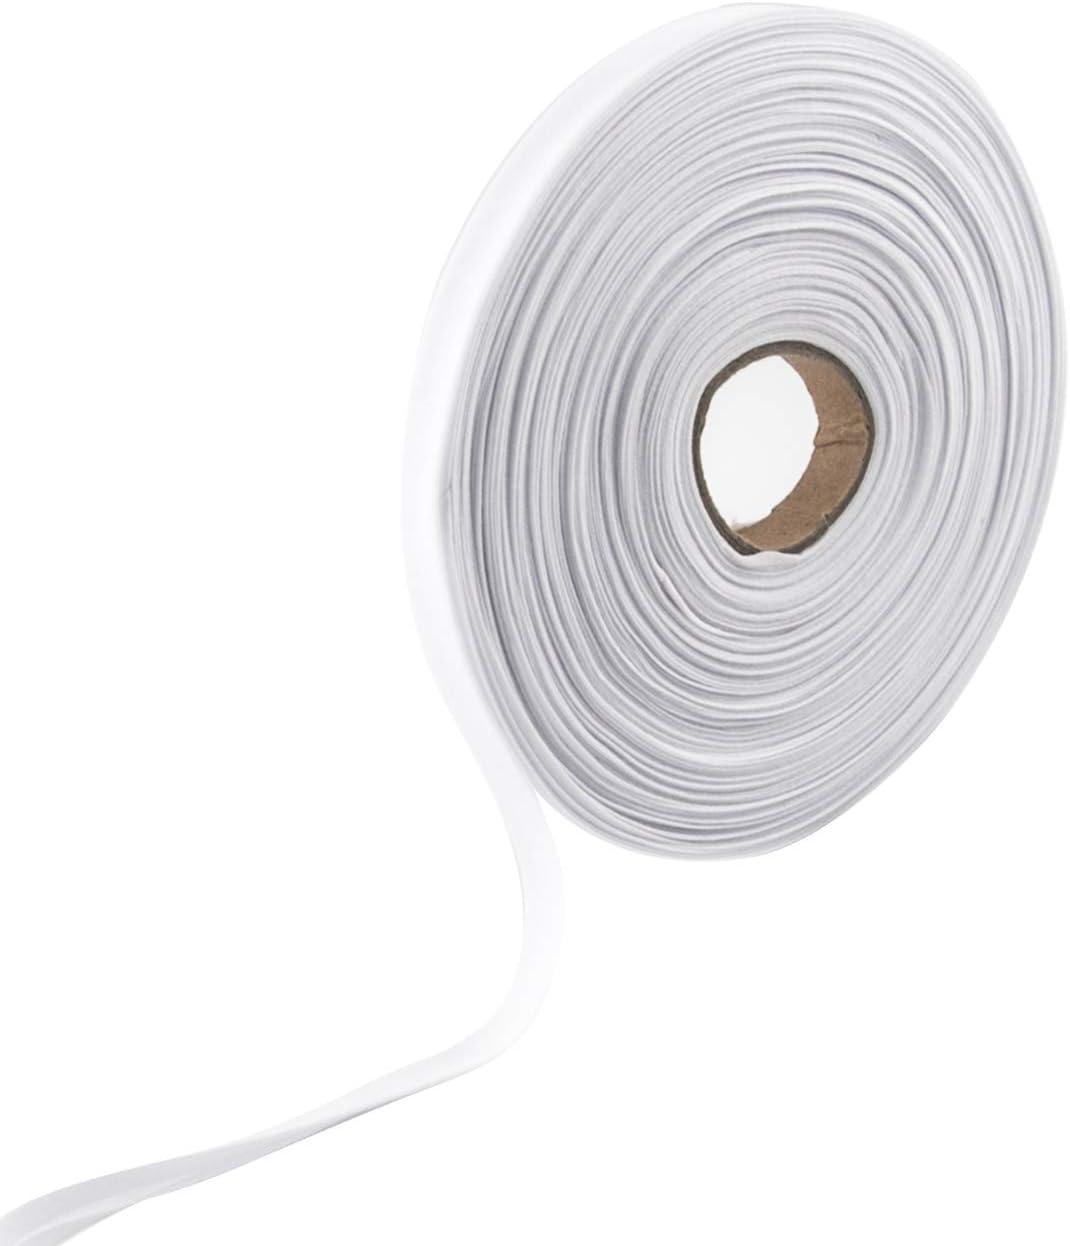 Carpet binding tape polyester in different widths and colours.